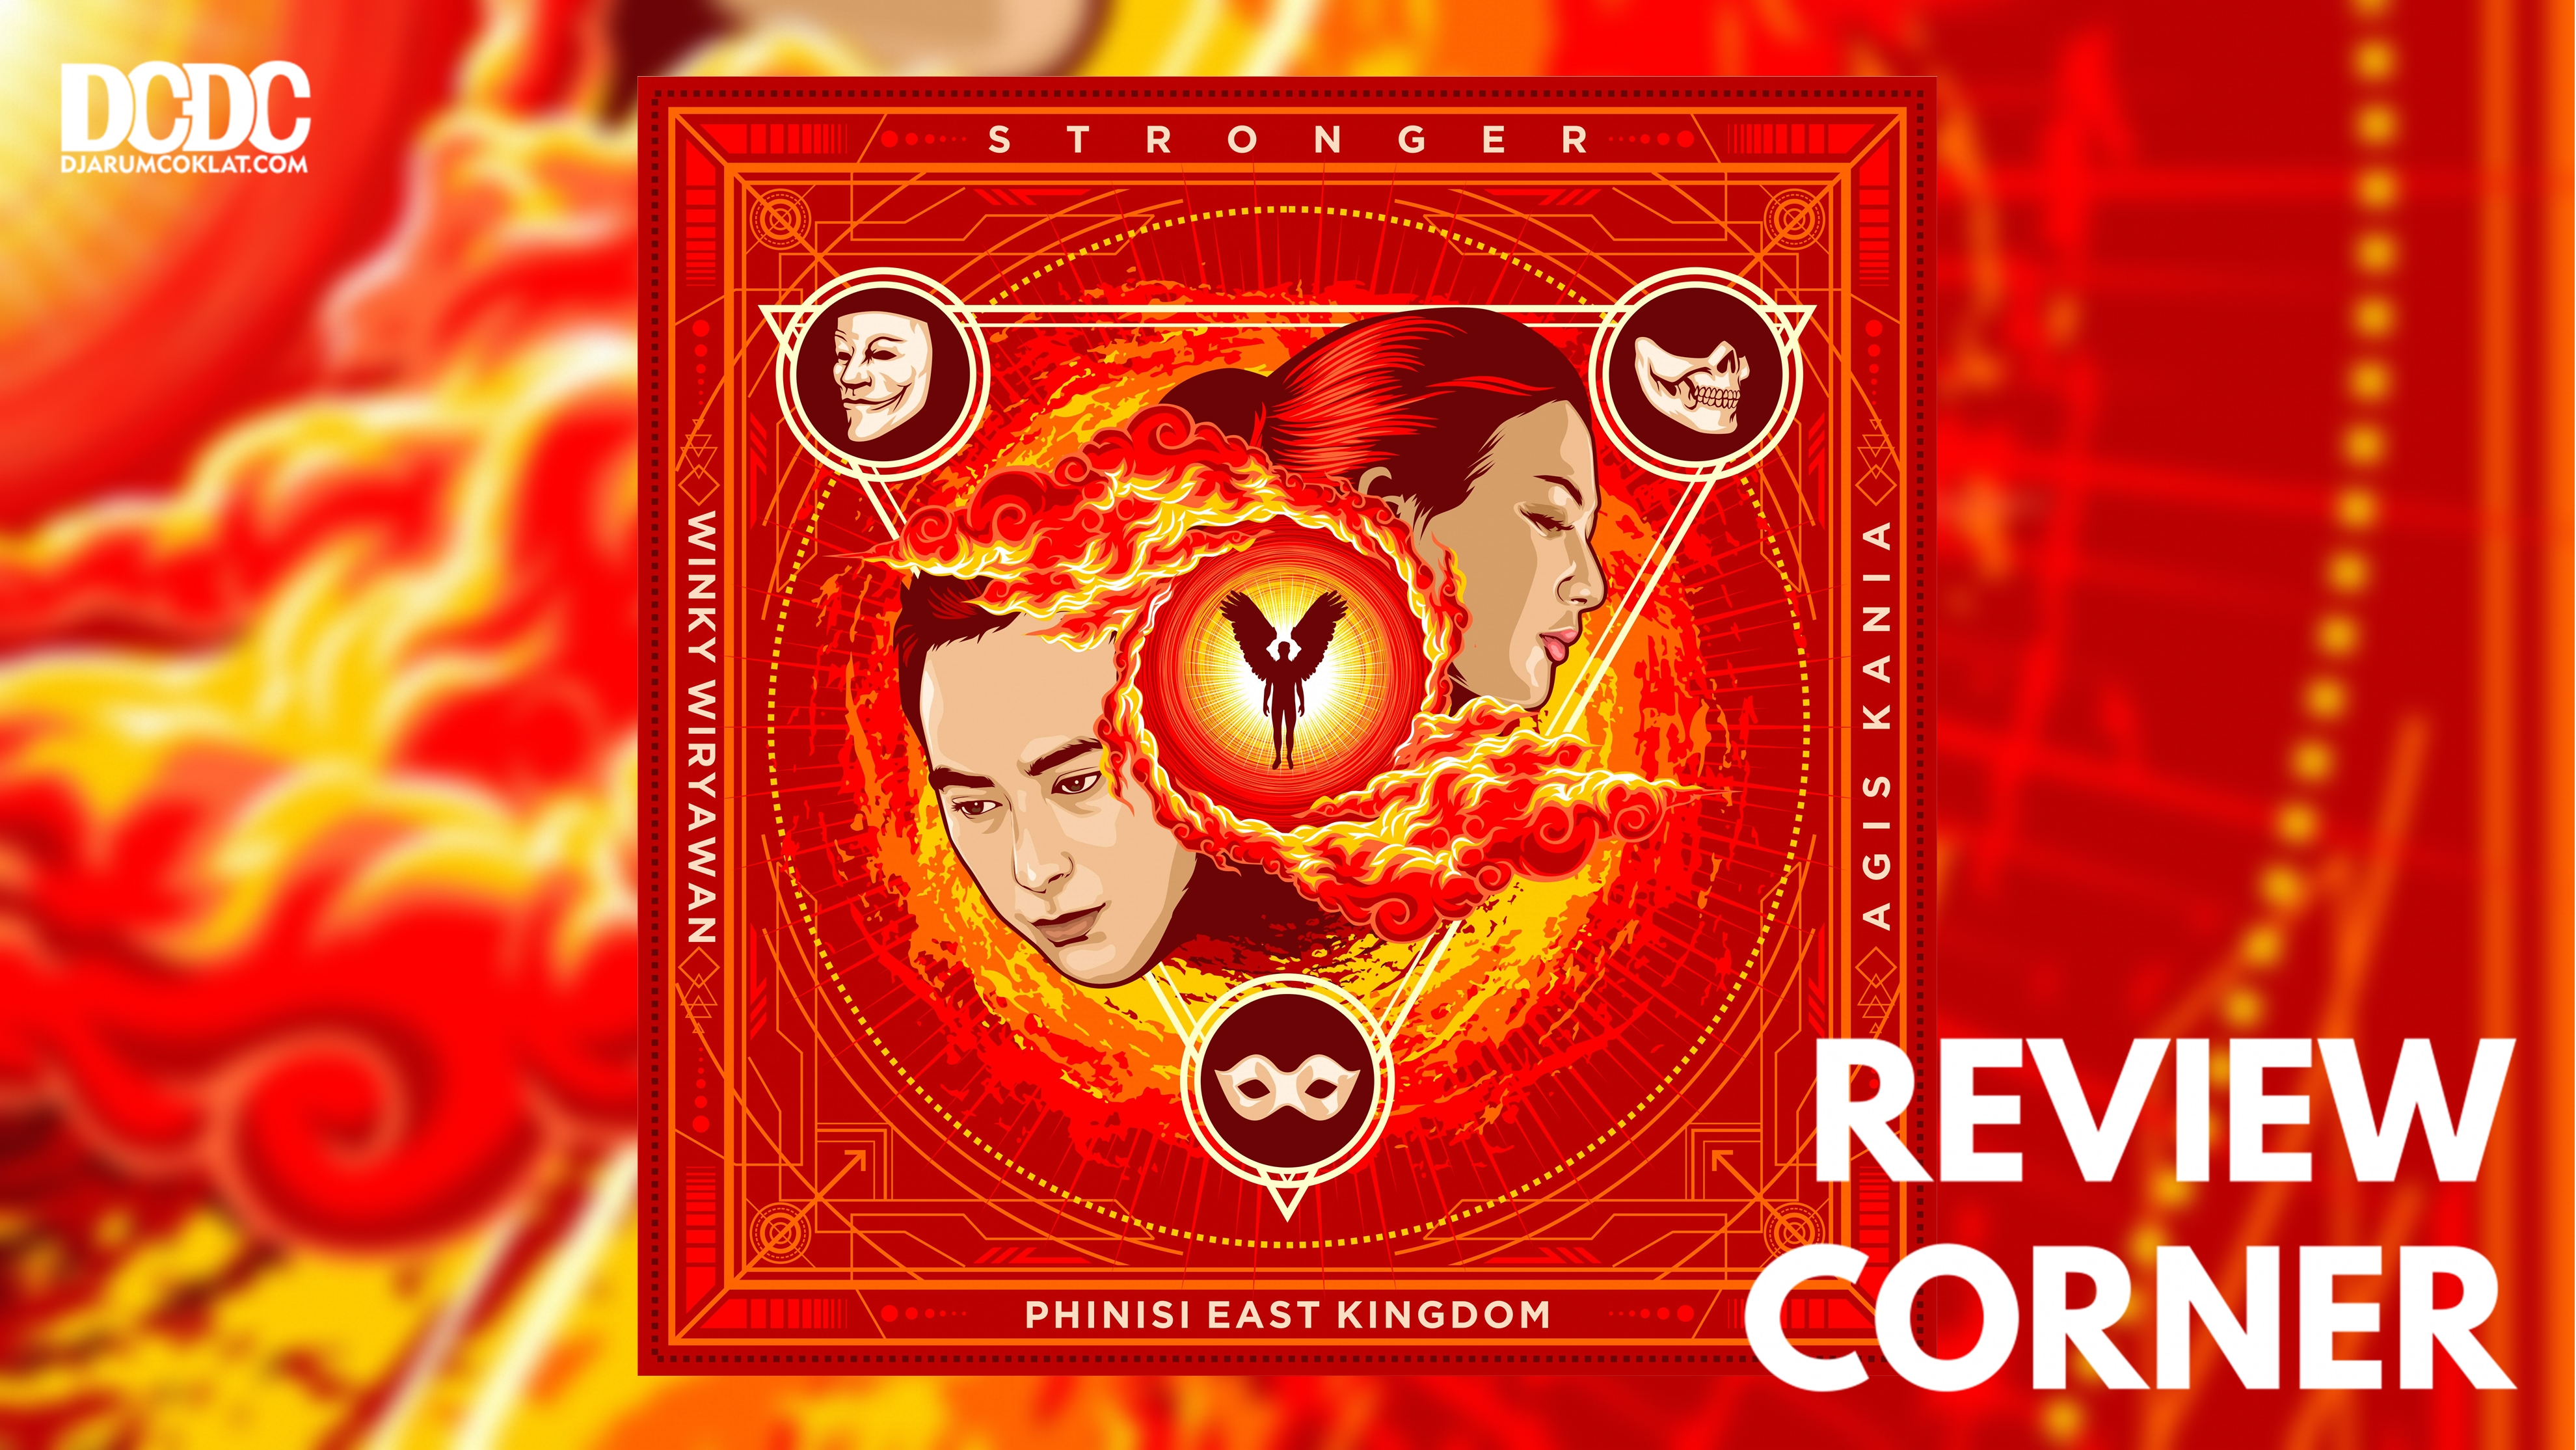 Song Review : Phinisi East Kingdom – “Stronger”